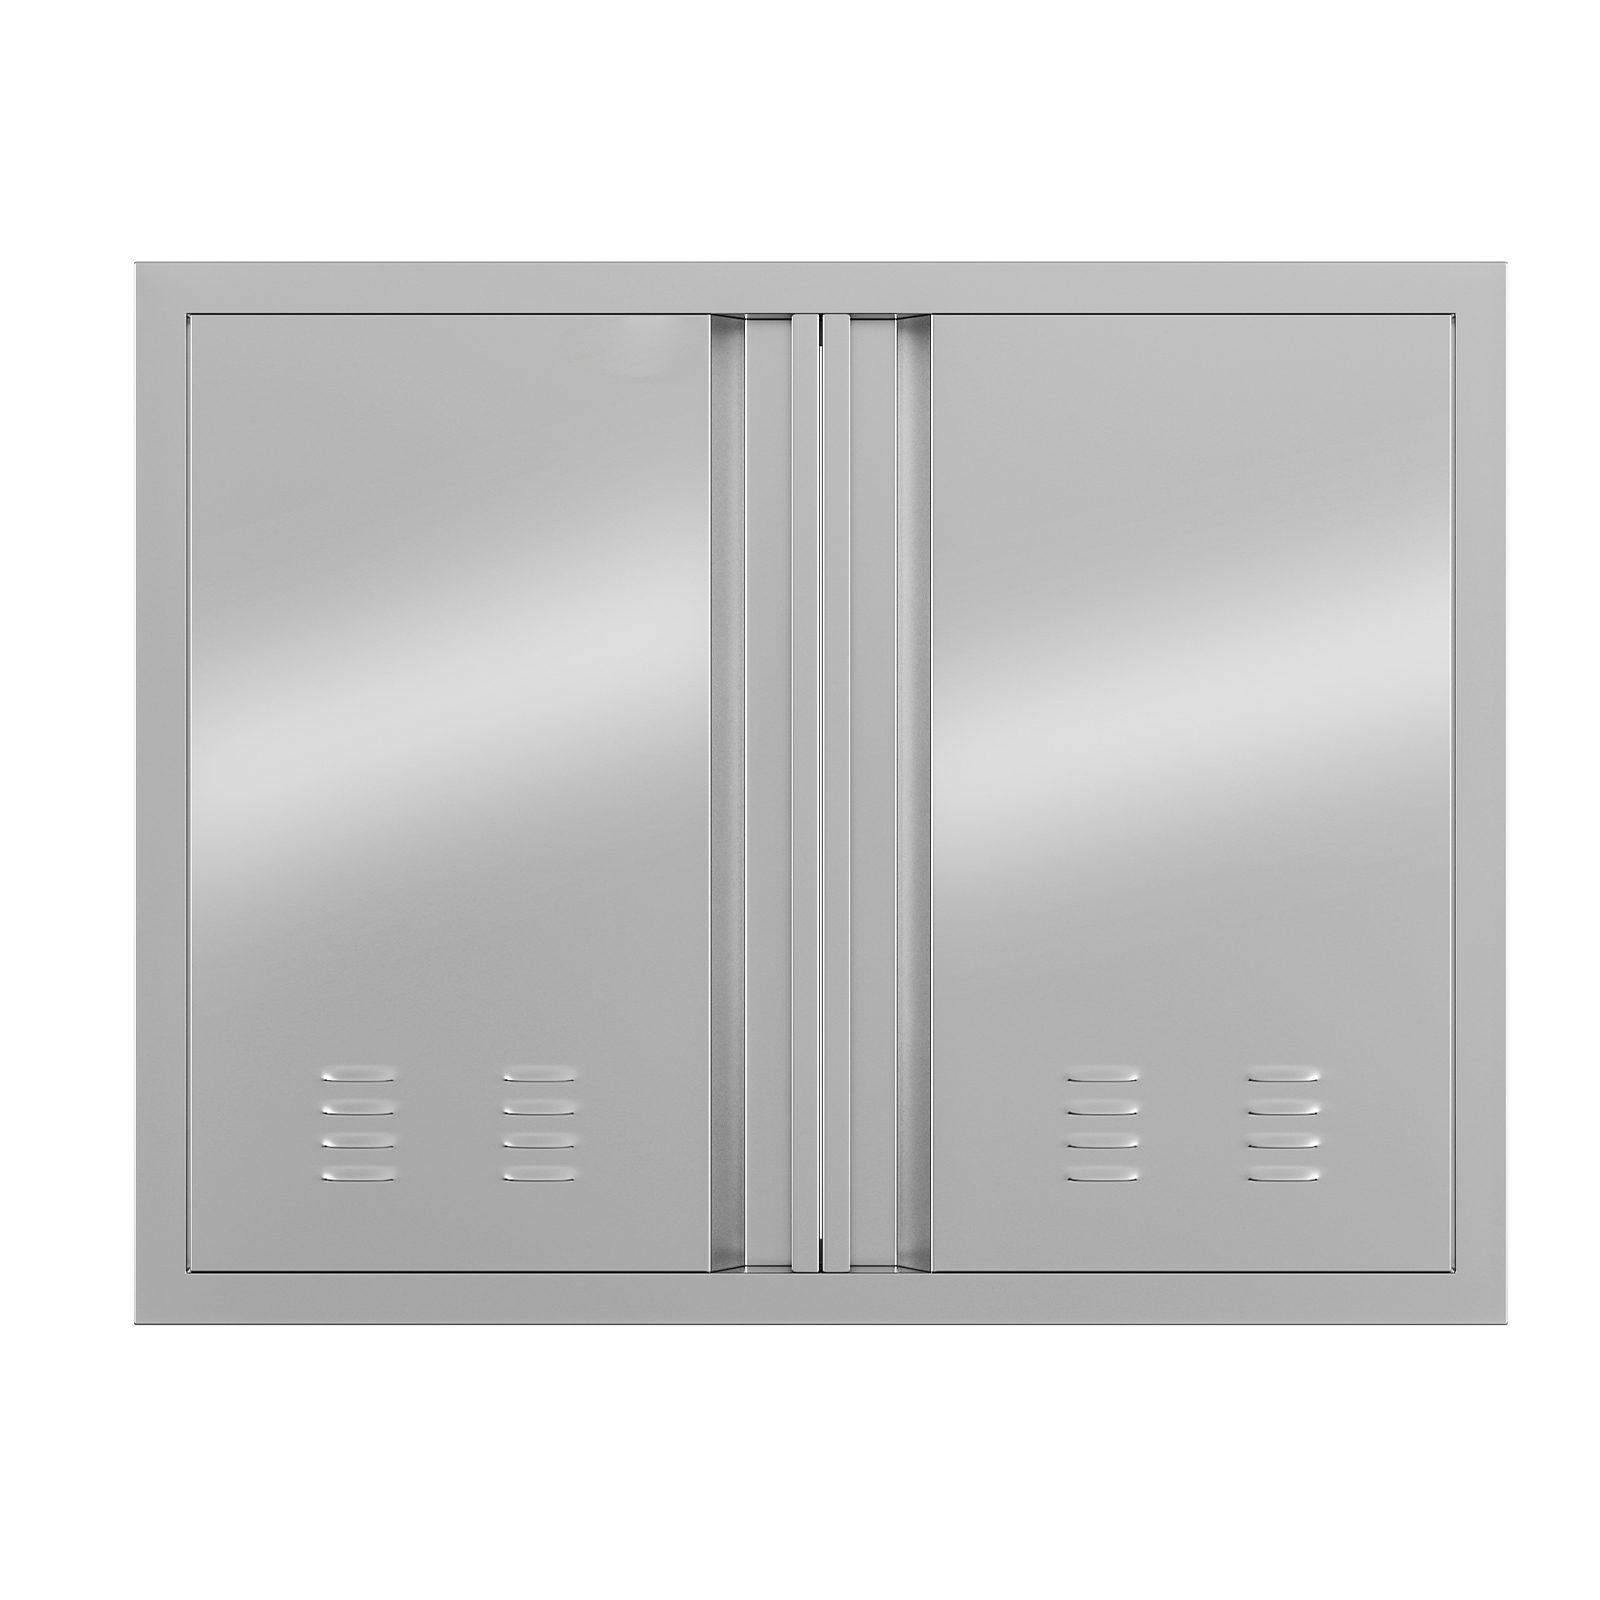 WhizMax 24" H x 31" W 304 Stainless Steel Outdoor Kitchen Access Door with Recessed Handle, Double Access Door for BBQ Island, Grilling Stati - image 3 of 7